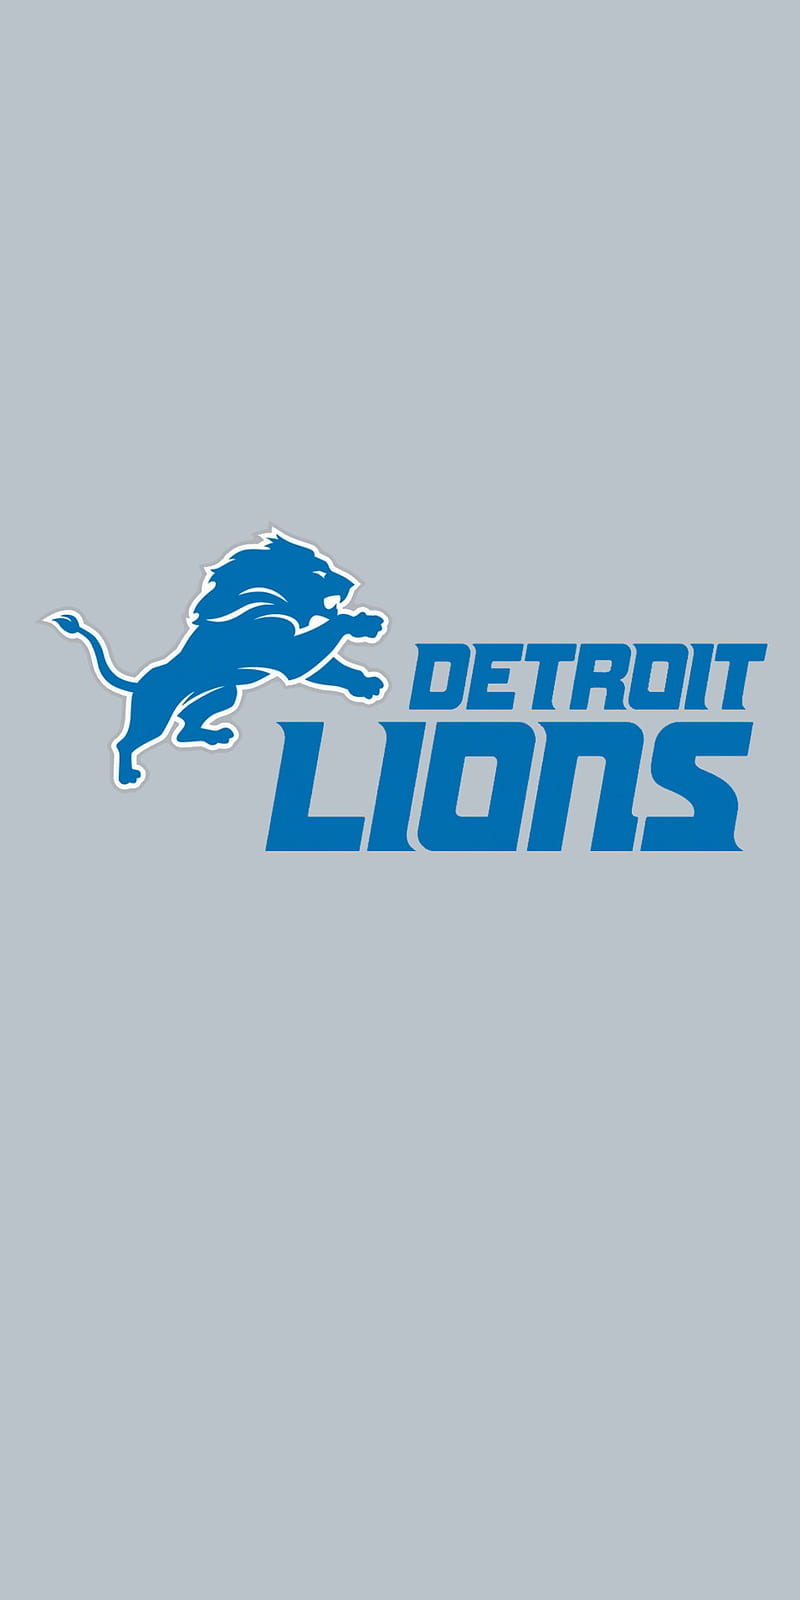 Free download download this iphone wallpaper you can download our iphone  wallpapers 325x576 for your Desktop Mobile  Tablet  Explore 49 Detroit  Lions iPhone 6 Wallpaper  Detroit Lions Wallpaper Detroit